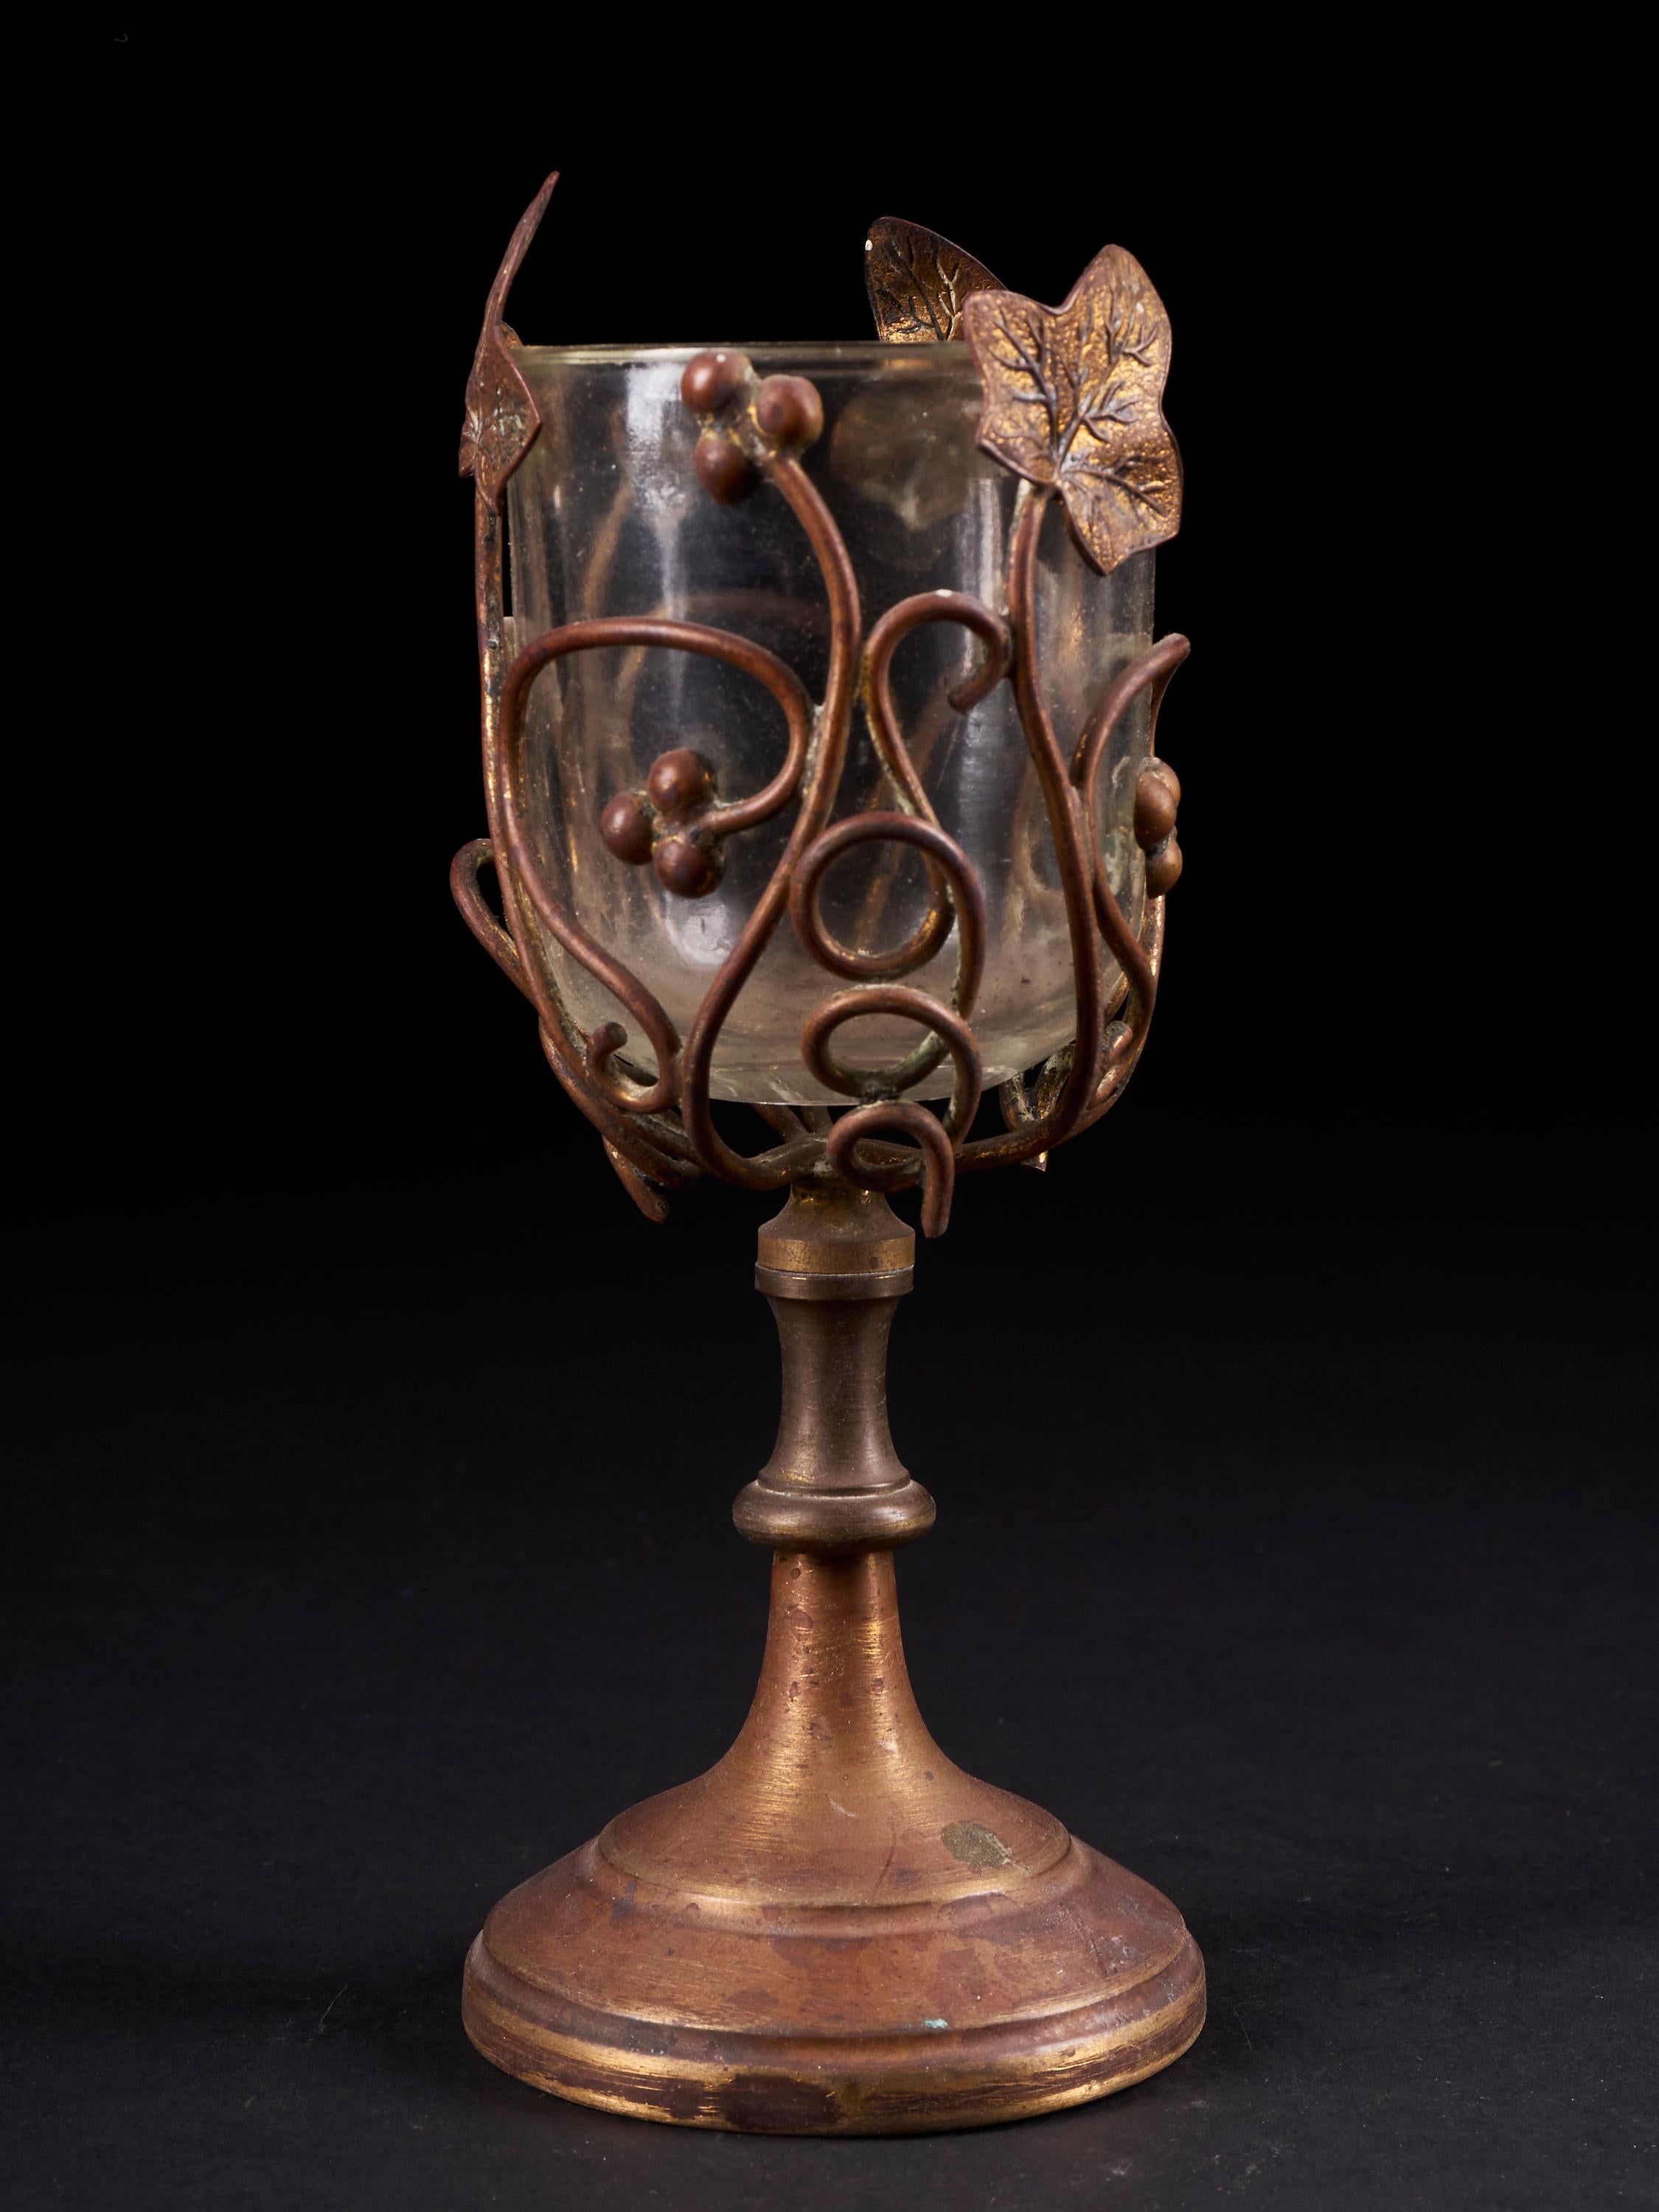 Most unusual wineglass made of glass and supported by a copper alloy foliage structure and a smooth stand, tagged AC in the glass bowl.